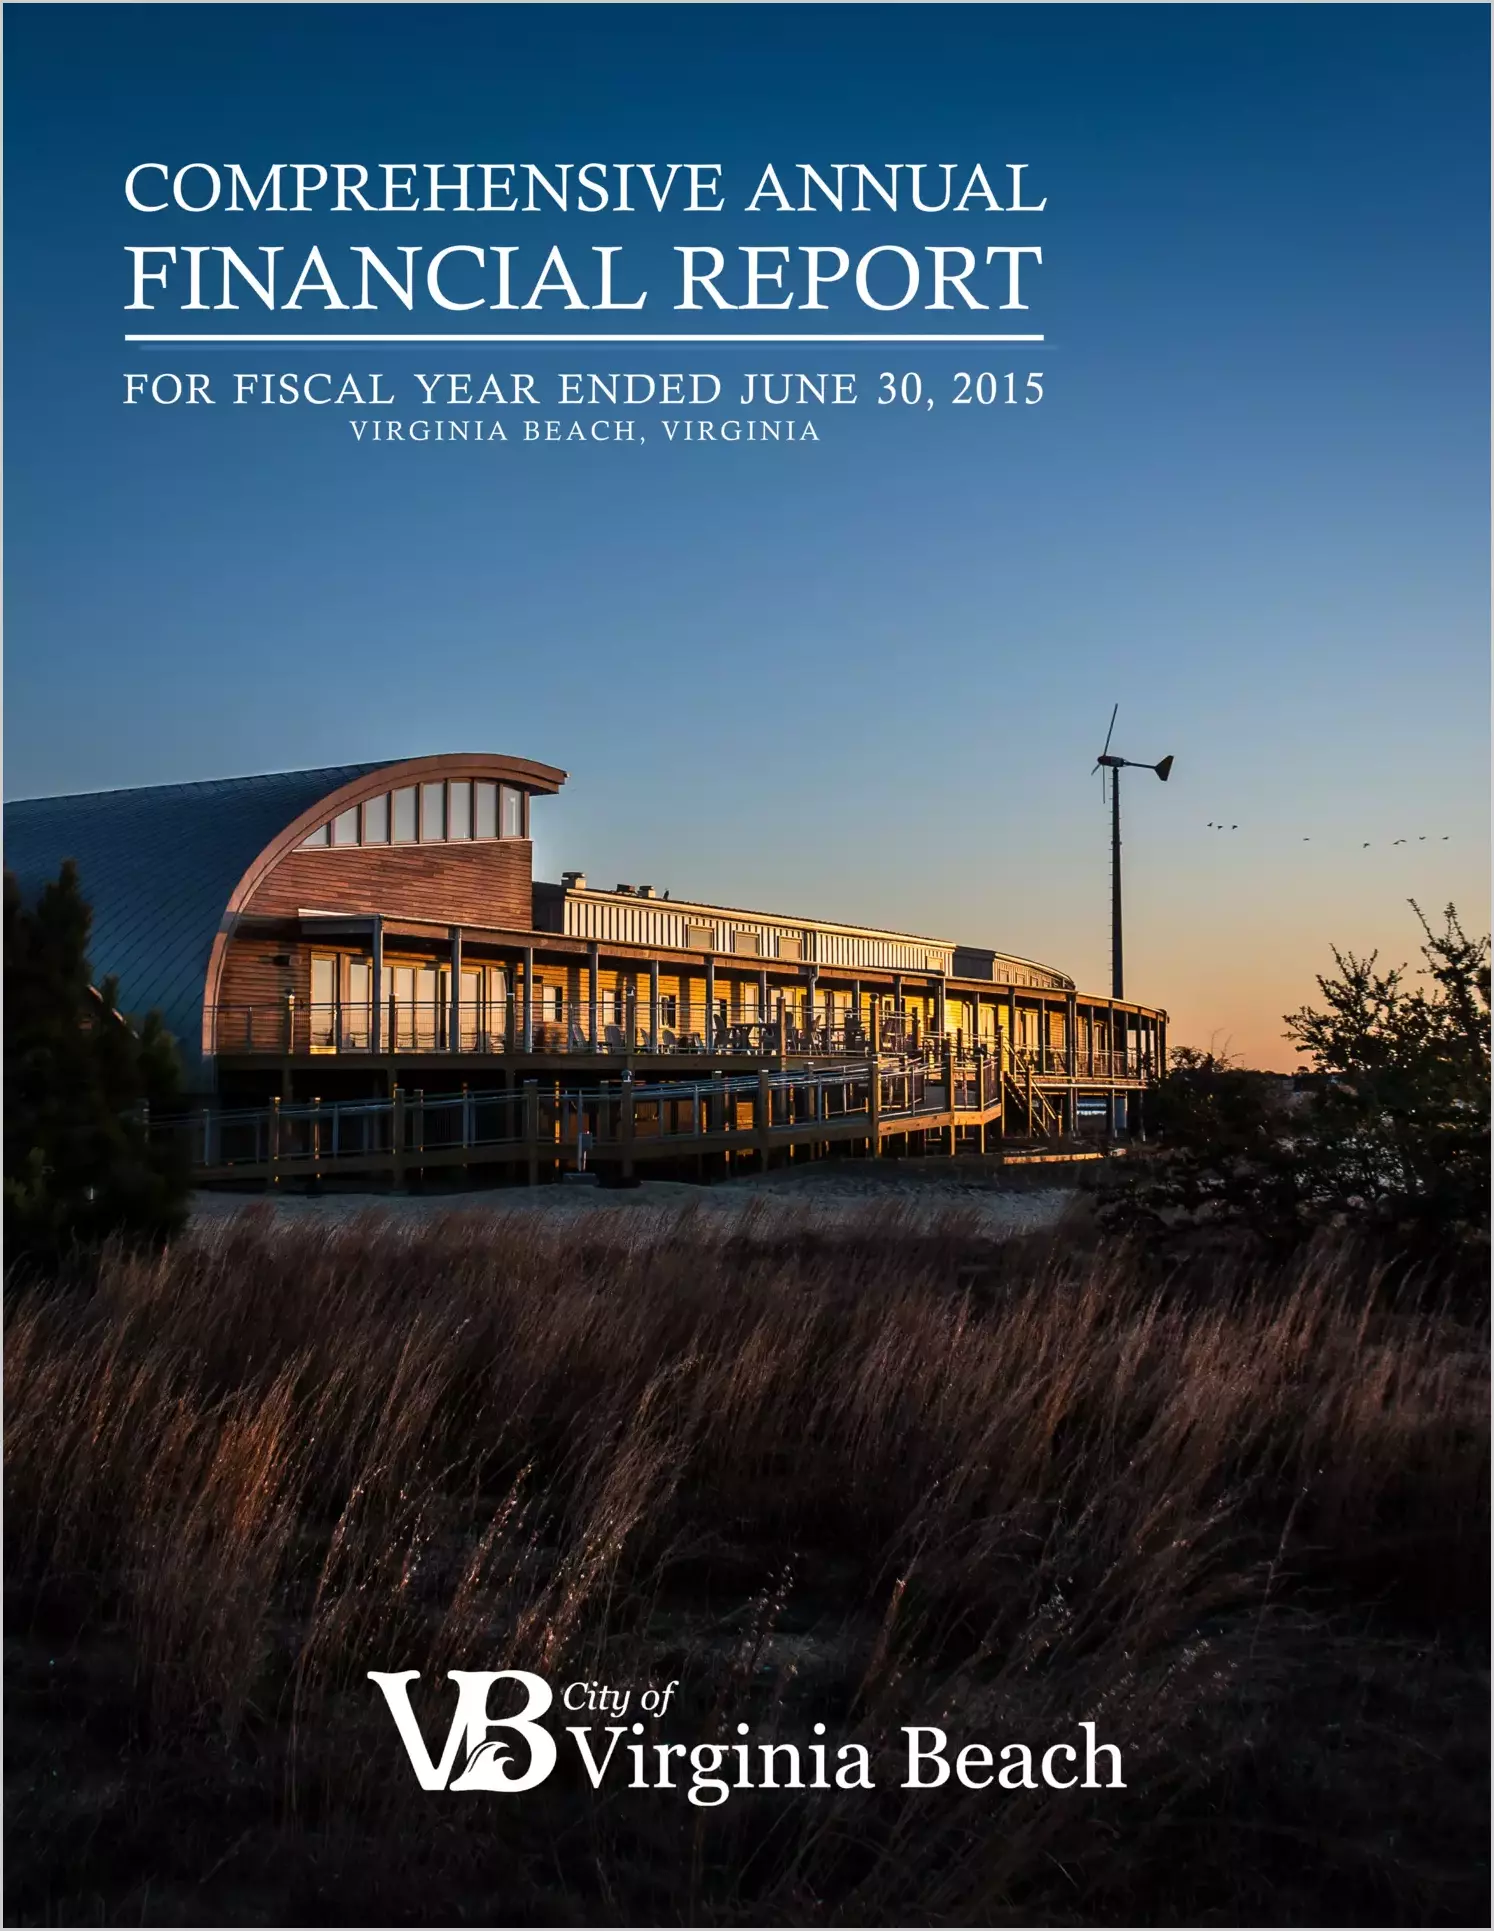 2015 Annual Financial Report for City of Virginia Beach